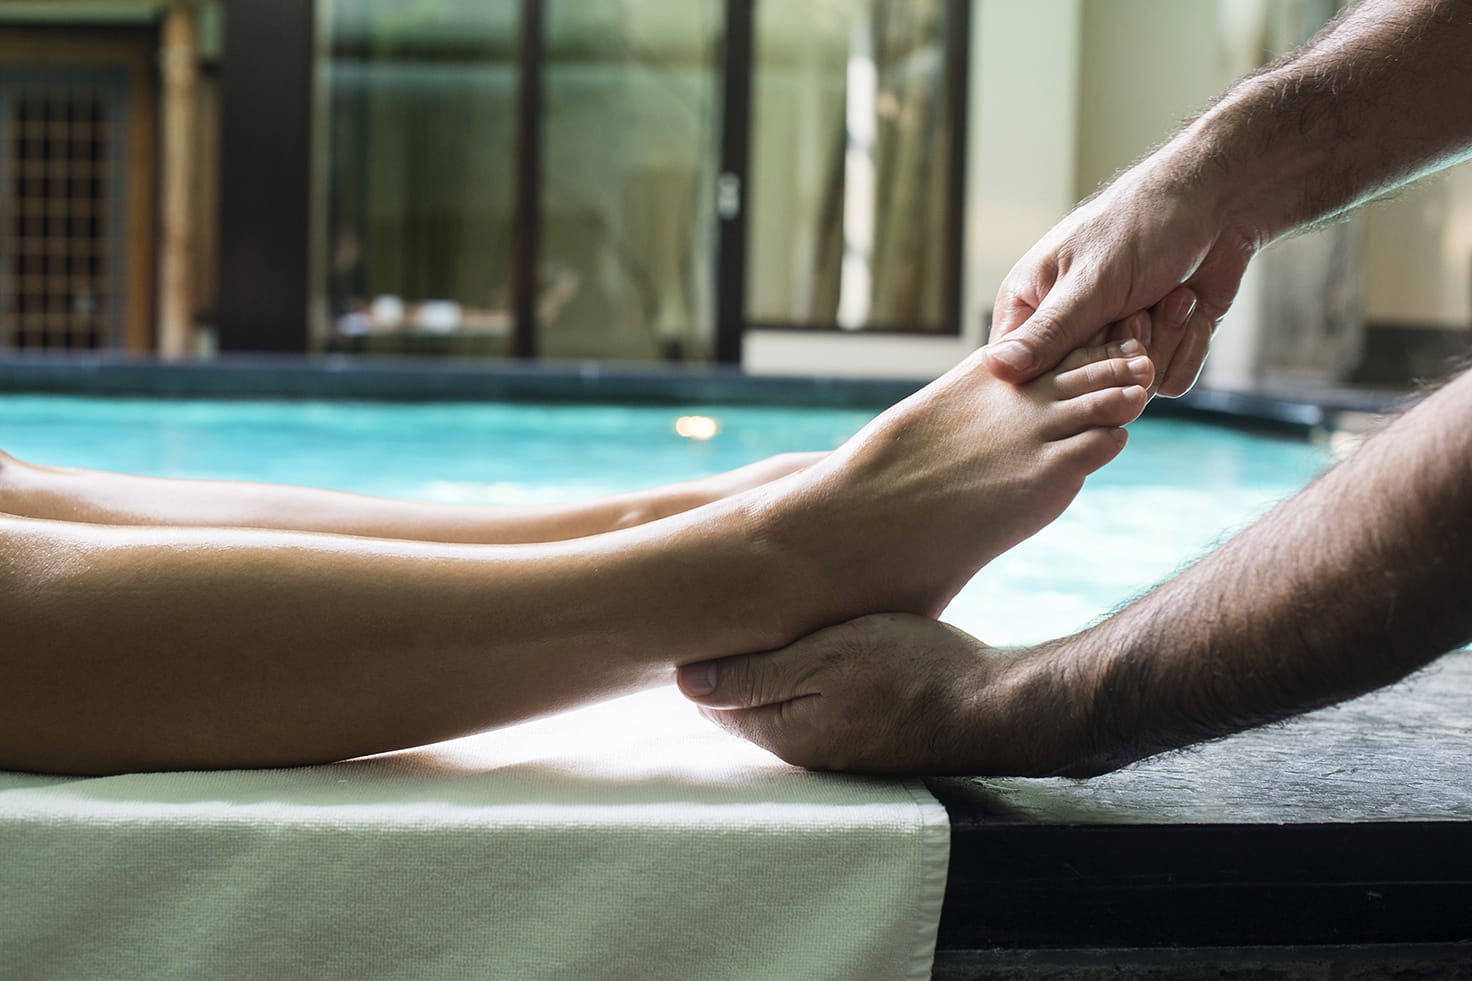 Which massage technique is used most often during a foot and leg massage?